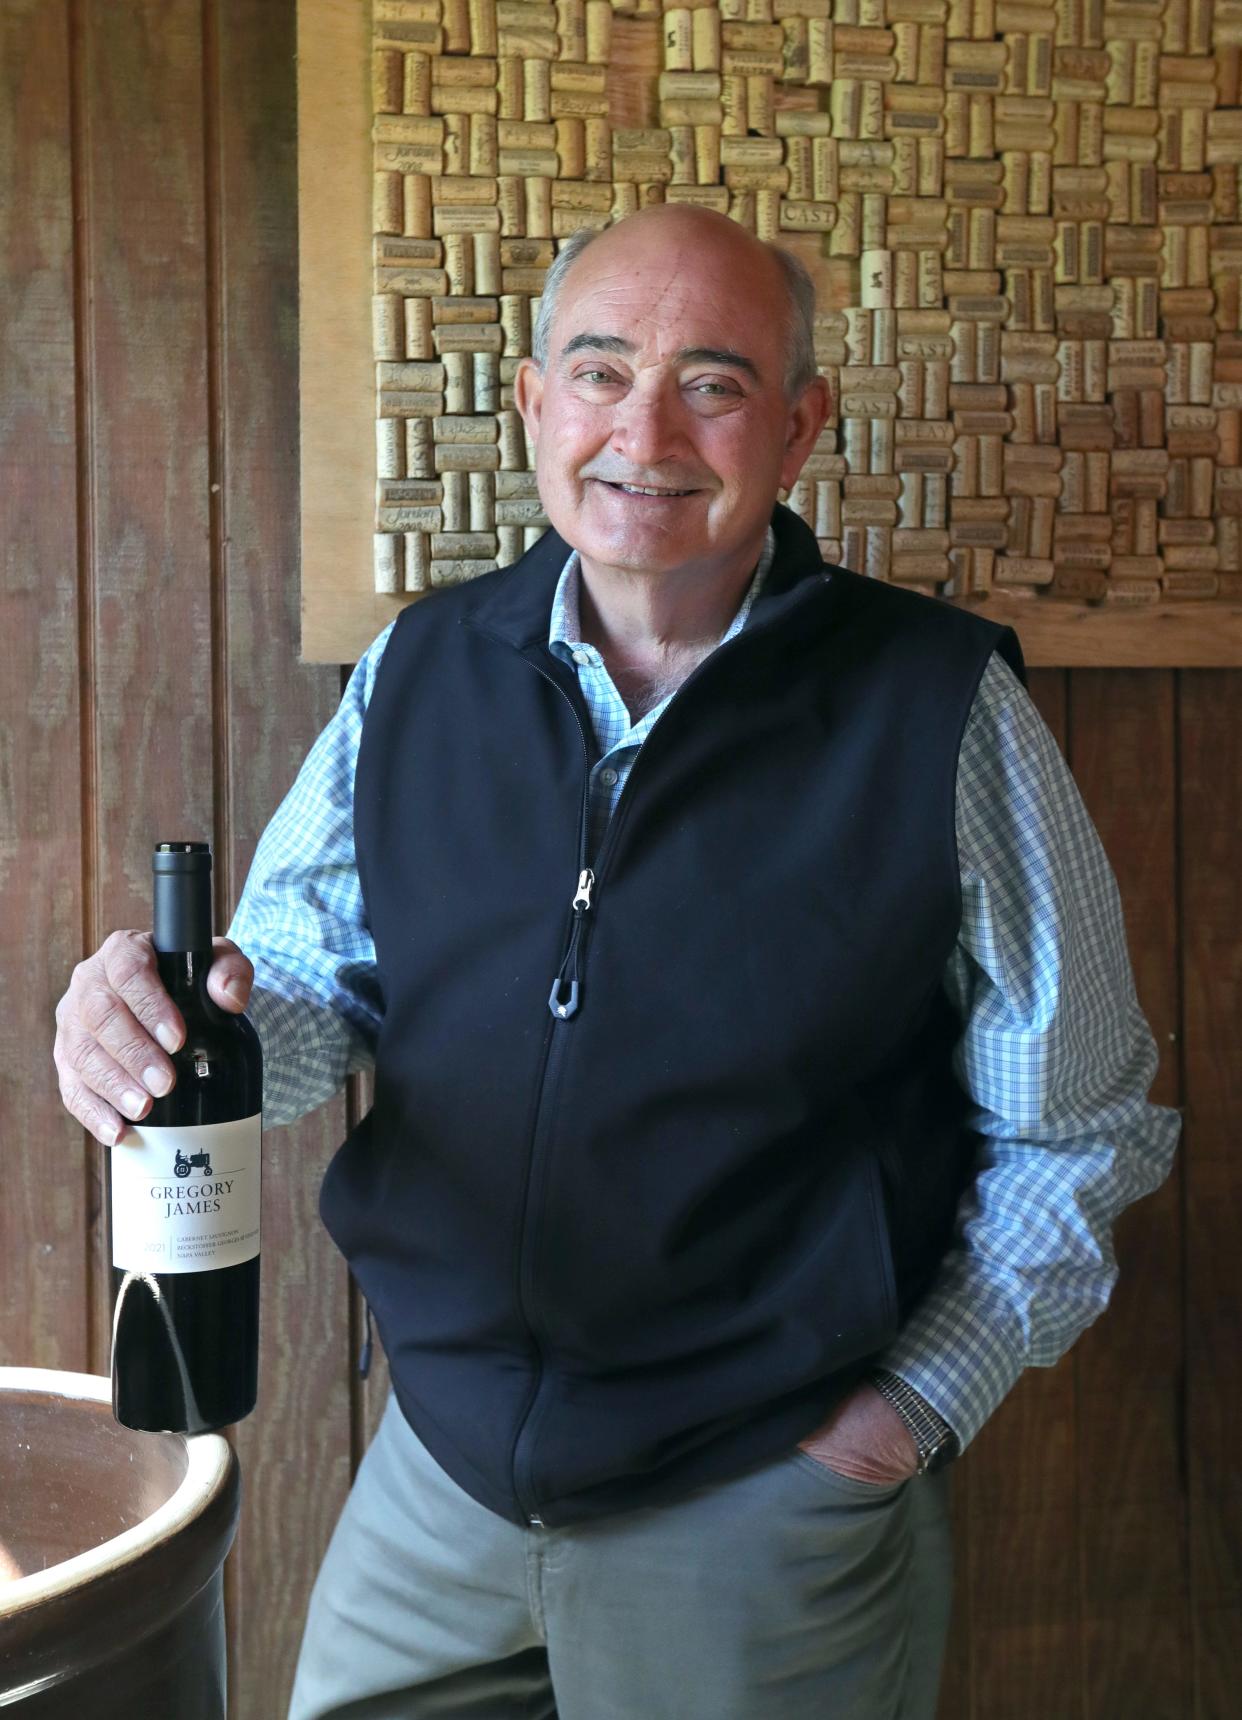 Jim Demuth, owner of Gregory James Wines in Sonoma, California, at his 600-acre Ohio farm in New Philadelphia Monday.